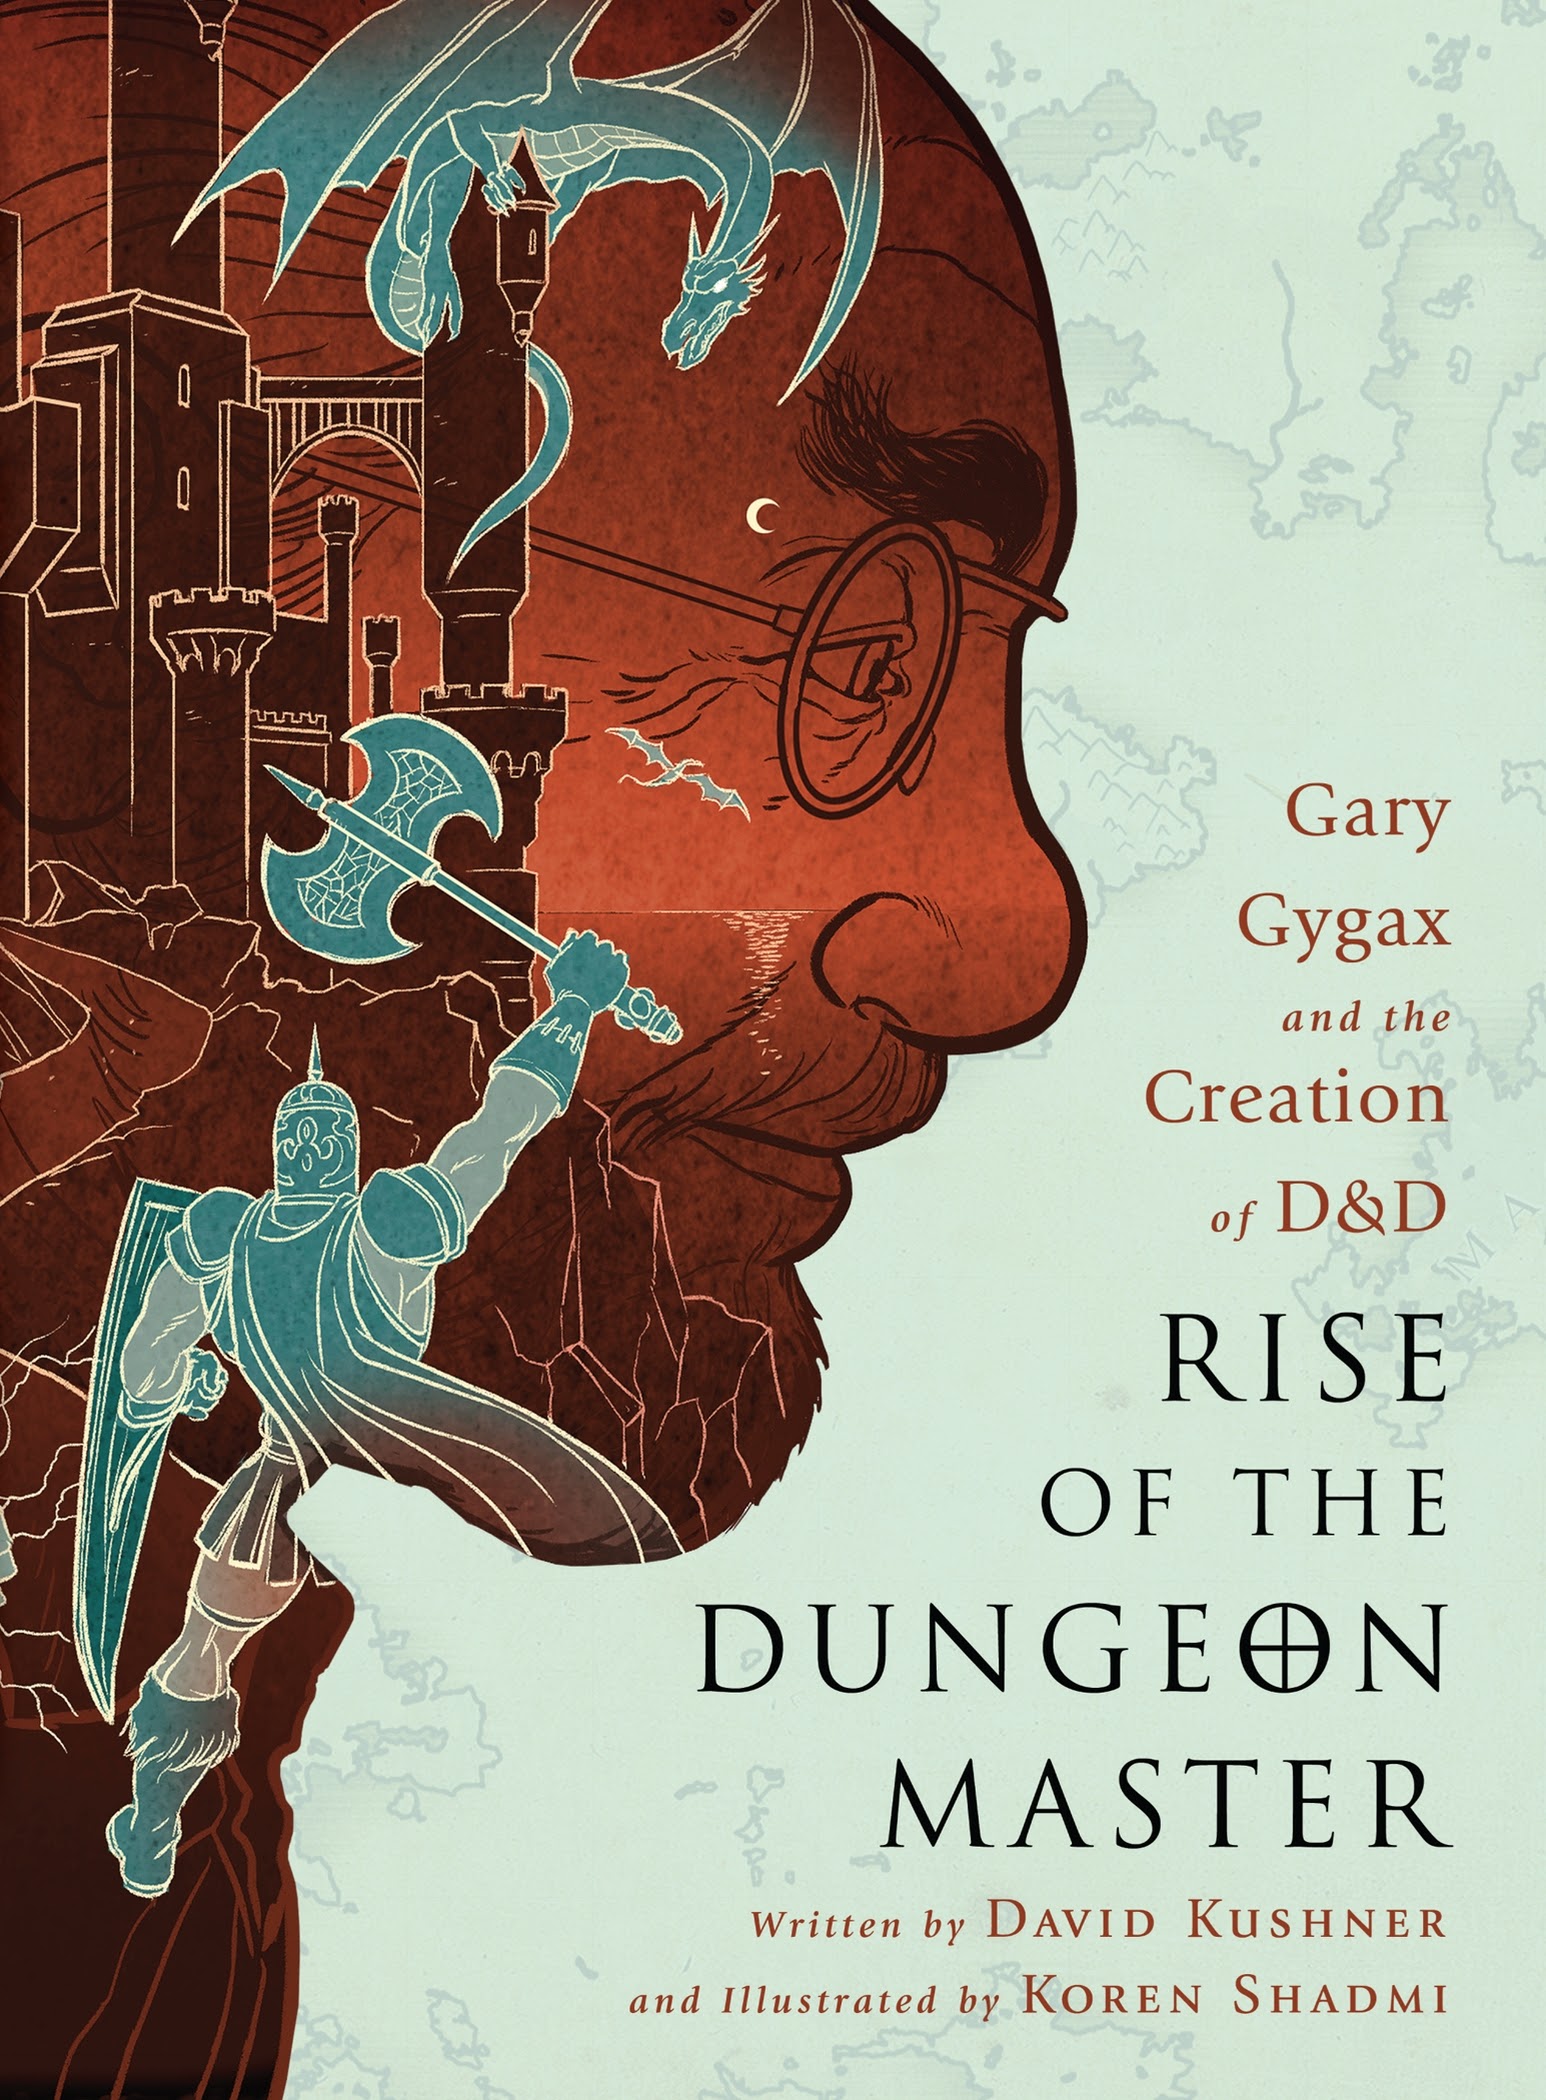 Read online Rise of the Dungeon Master: Gary Gygax and the Creation of D&D comic -  Issue # TPB - 1